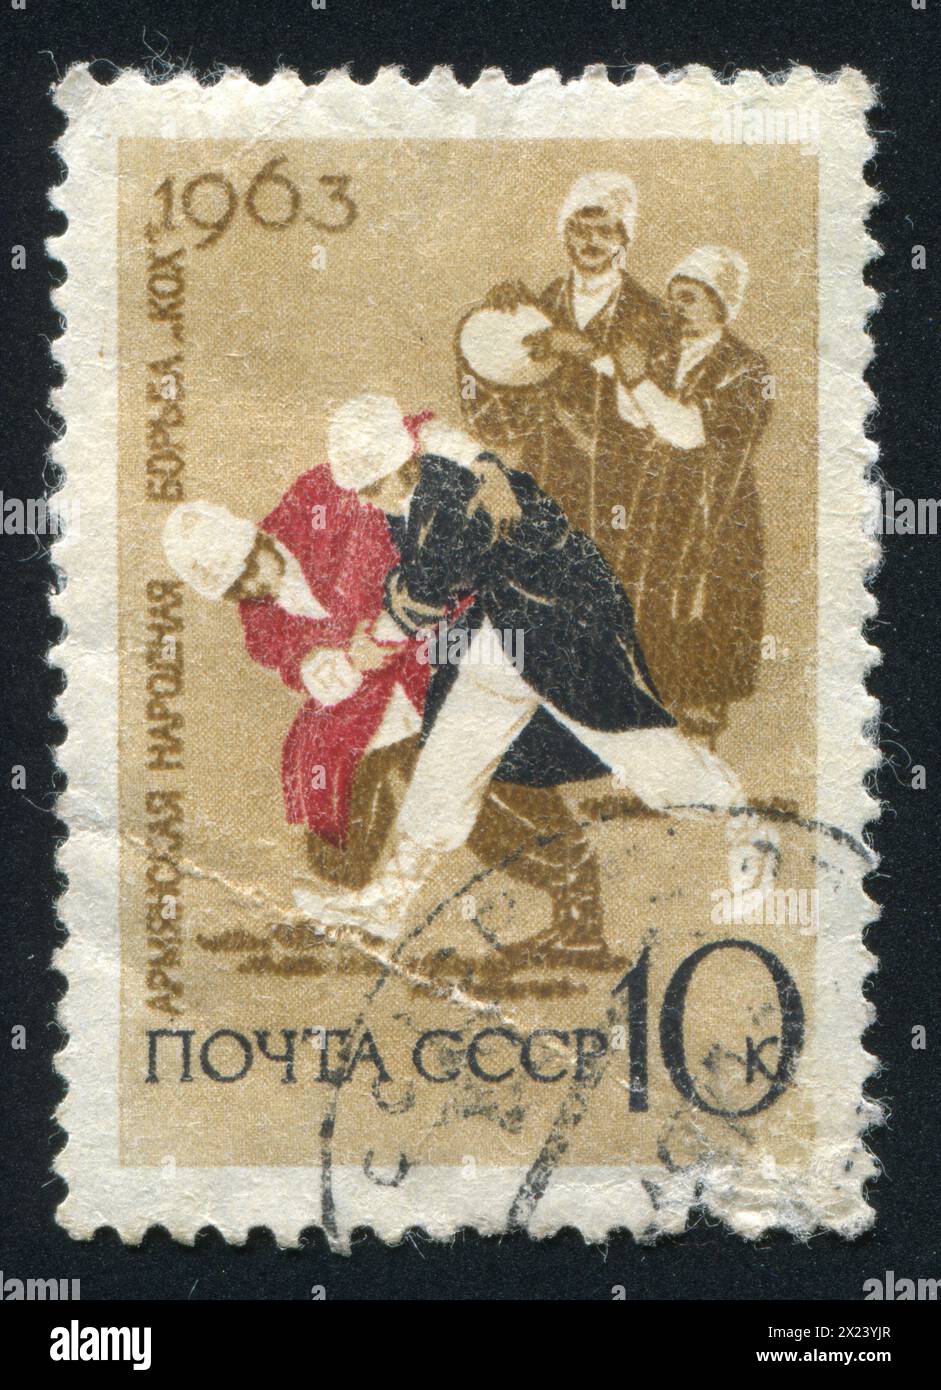 RUSSIA - CIRCA 1963: stamp printed by Russia, shows Armenian wrestling, circa 1963 Stock Photo